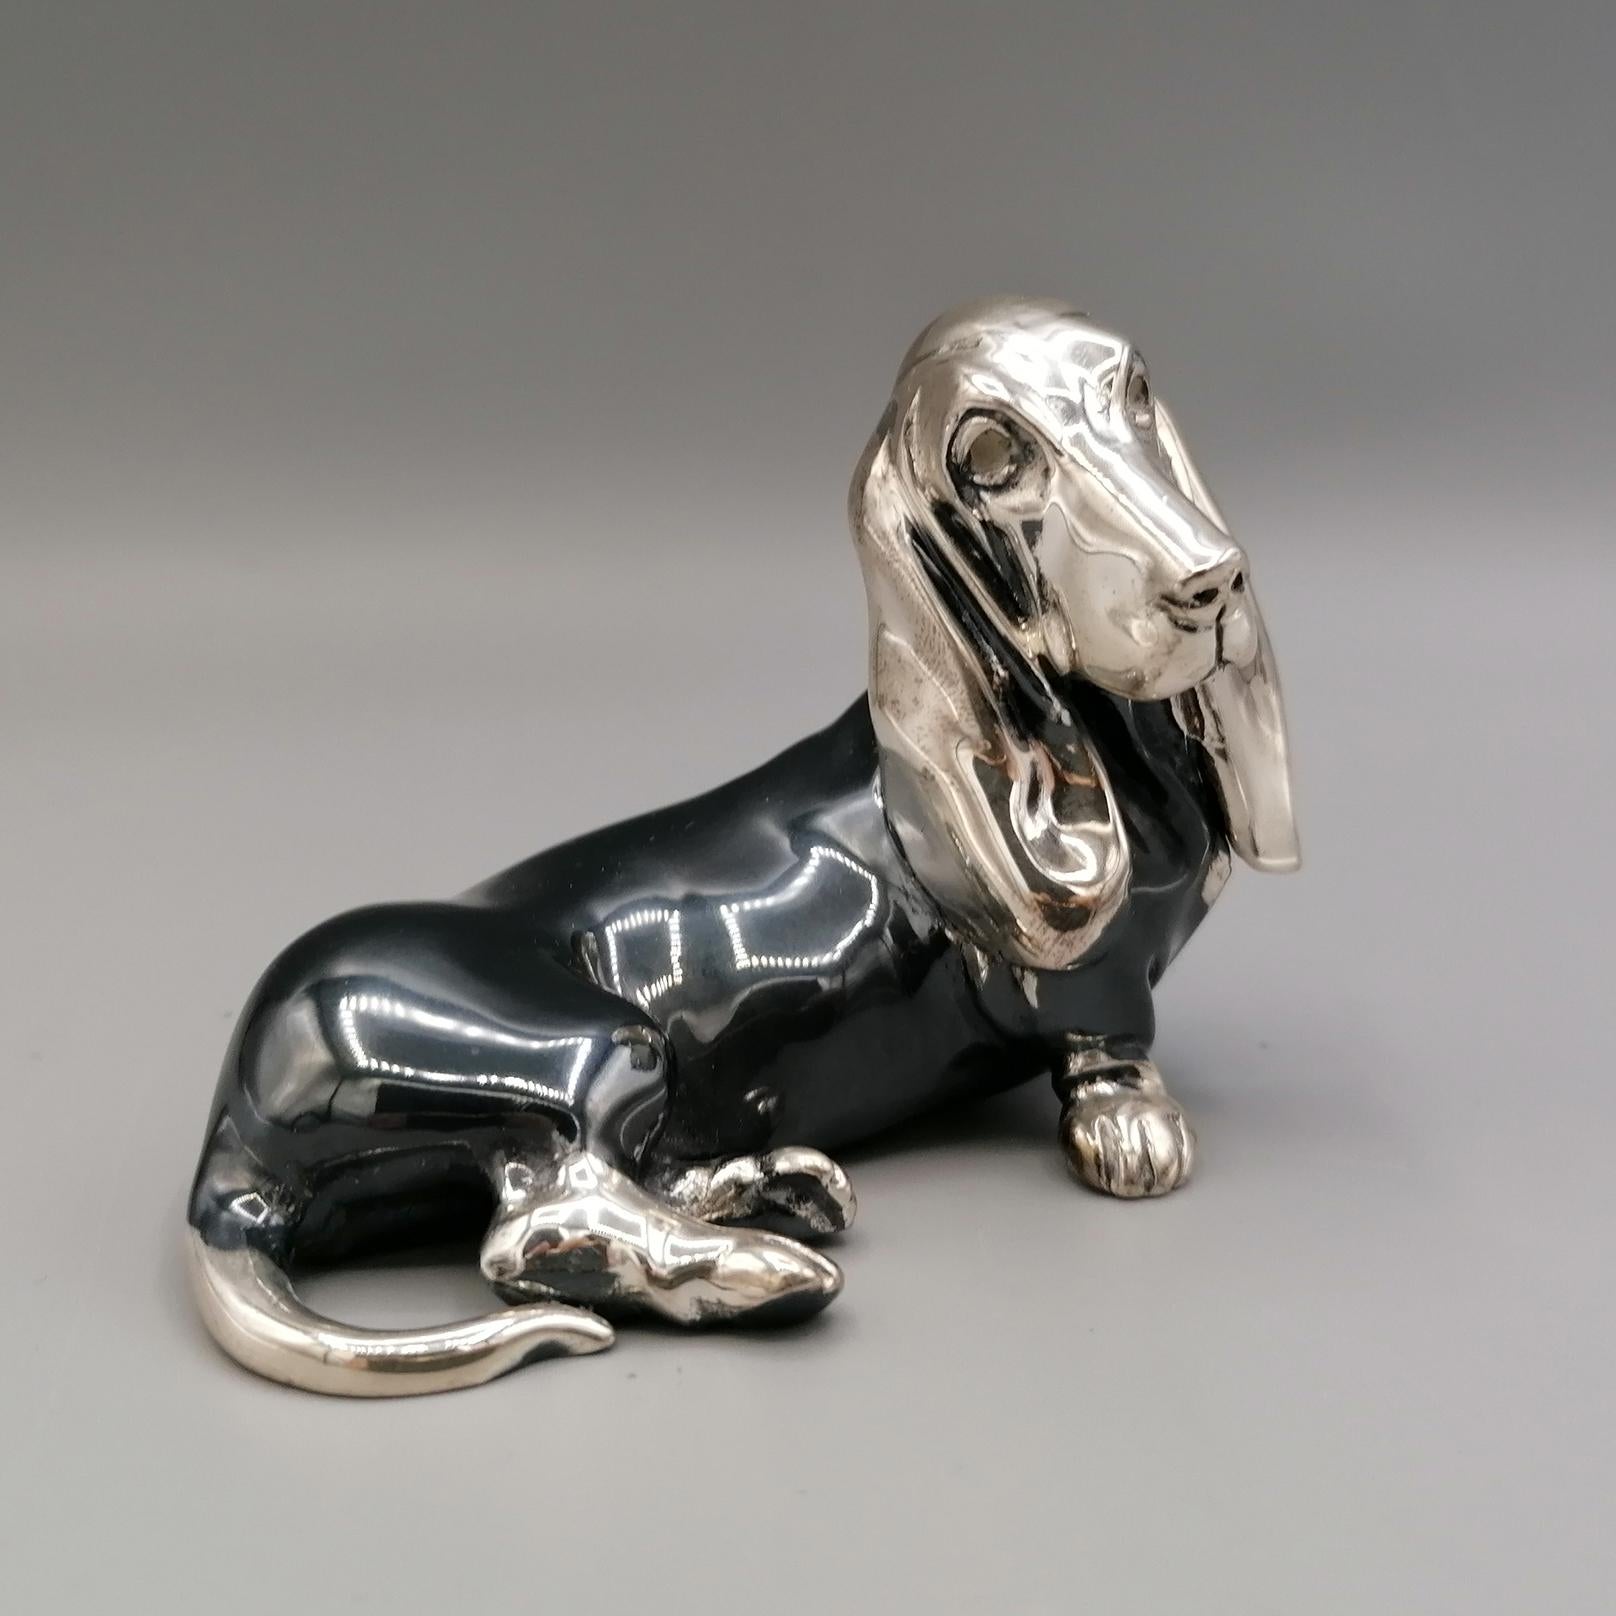 Basset hound dog sculture in 800 solid silver.
The object was made with the technique of fusion in two halves and subsequently joined by welding. 
In the lower part of the statuette you can see the two holes made to let the welding vapors